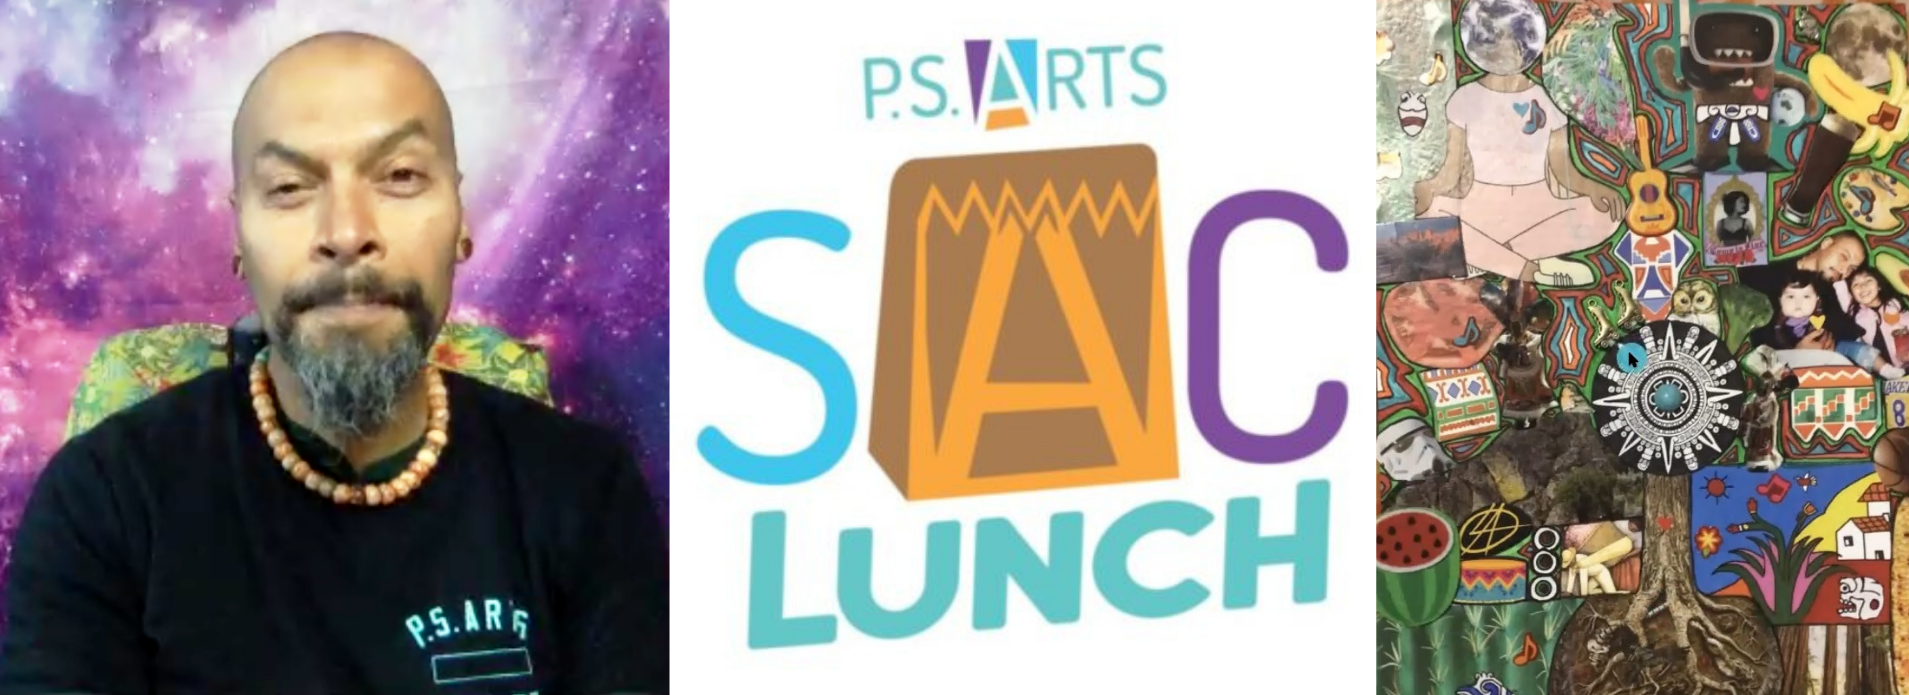 P.S. Arts students welcomed their new Teaching Artist, Mr. David Partida at SAC Lunch Update